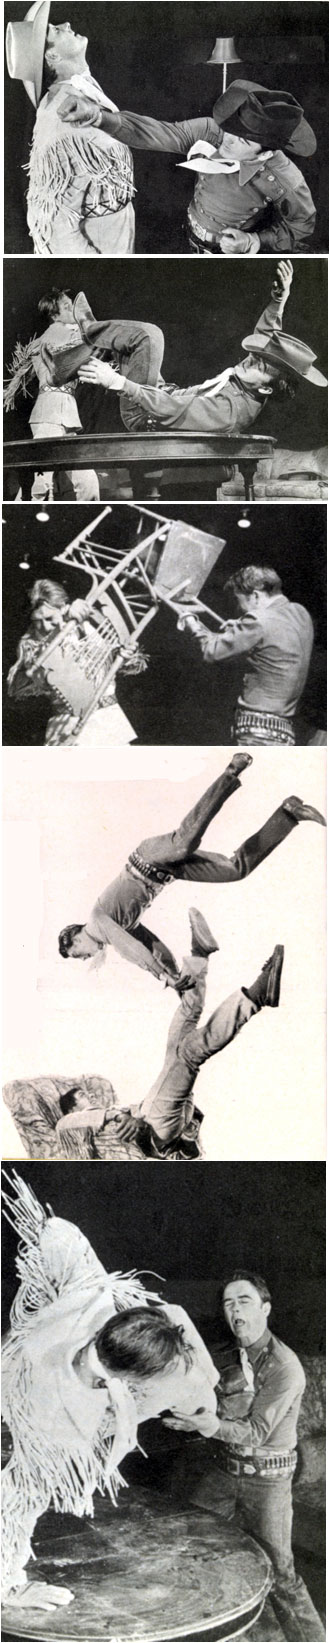 For their 1953 rodeo appearances, Jock Mahoney as the “Range Rider” and Dick Jones as Dick West staged a 10 minute “movie fight” during which they slugged it out with fists and splintering chairs.